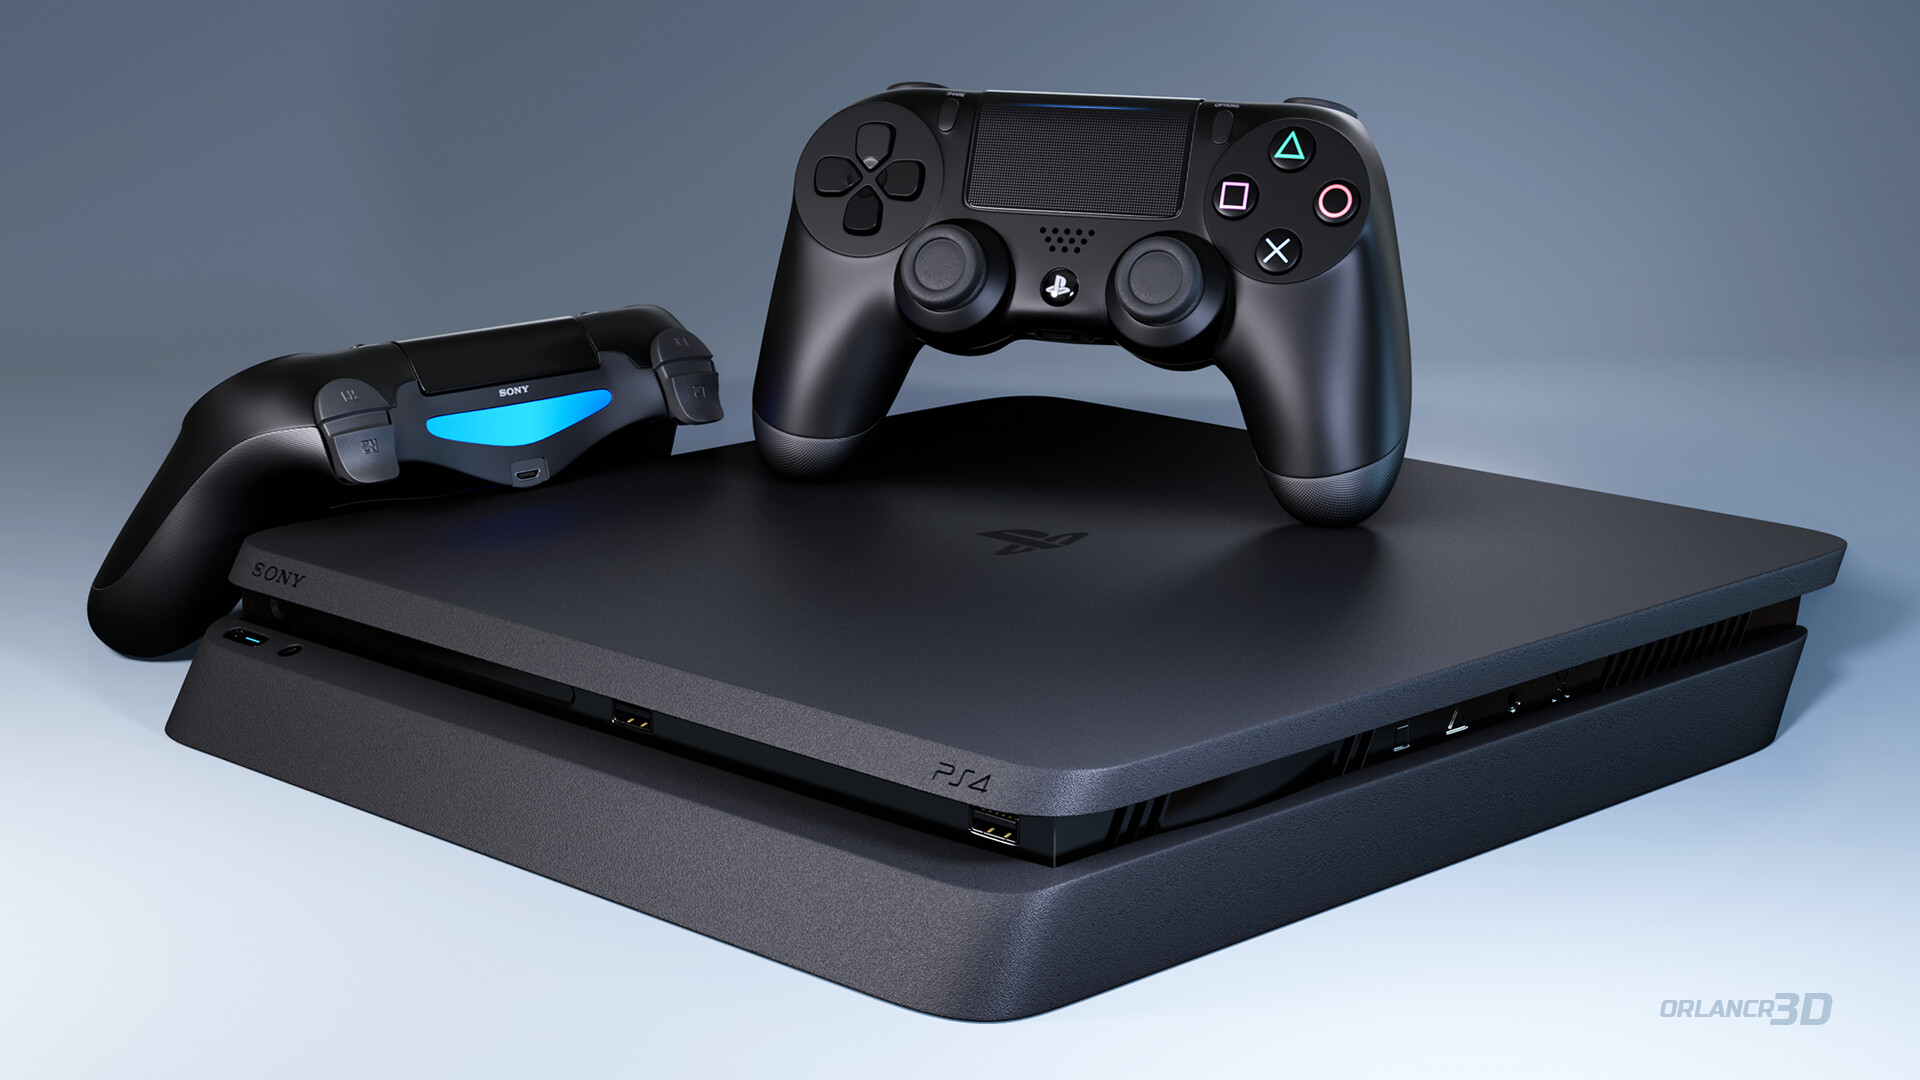 Playstation 4 Console with Dualshock 4 controllers - Finished Projects -  Blender Artists Community